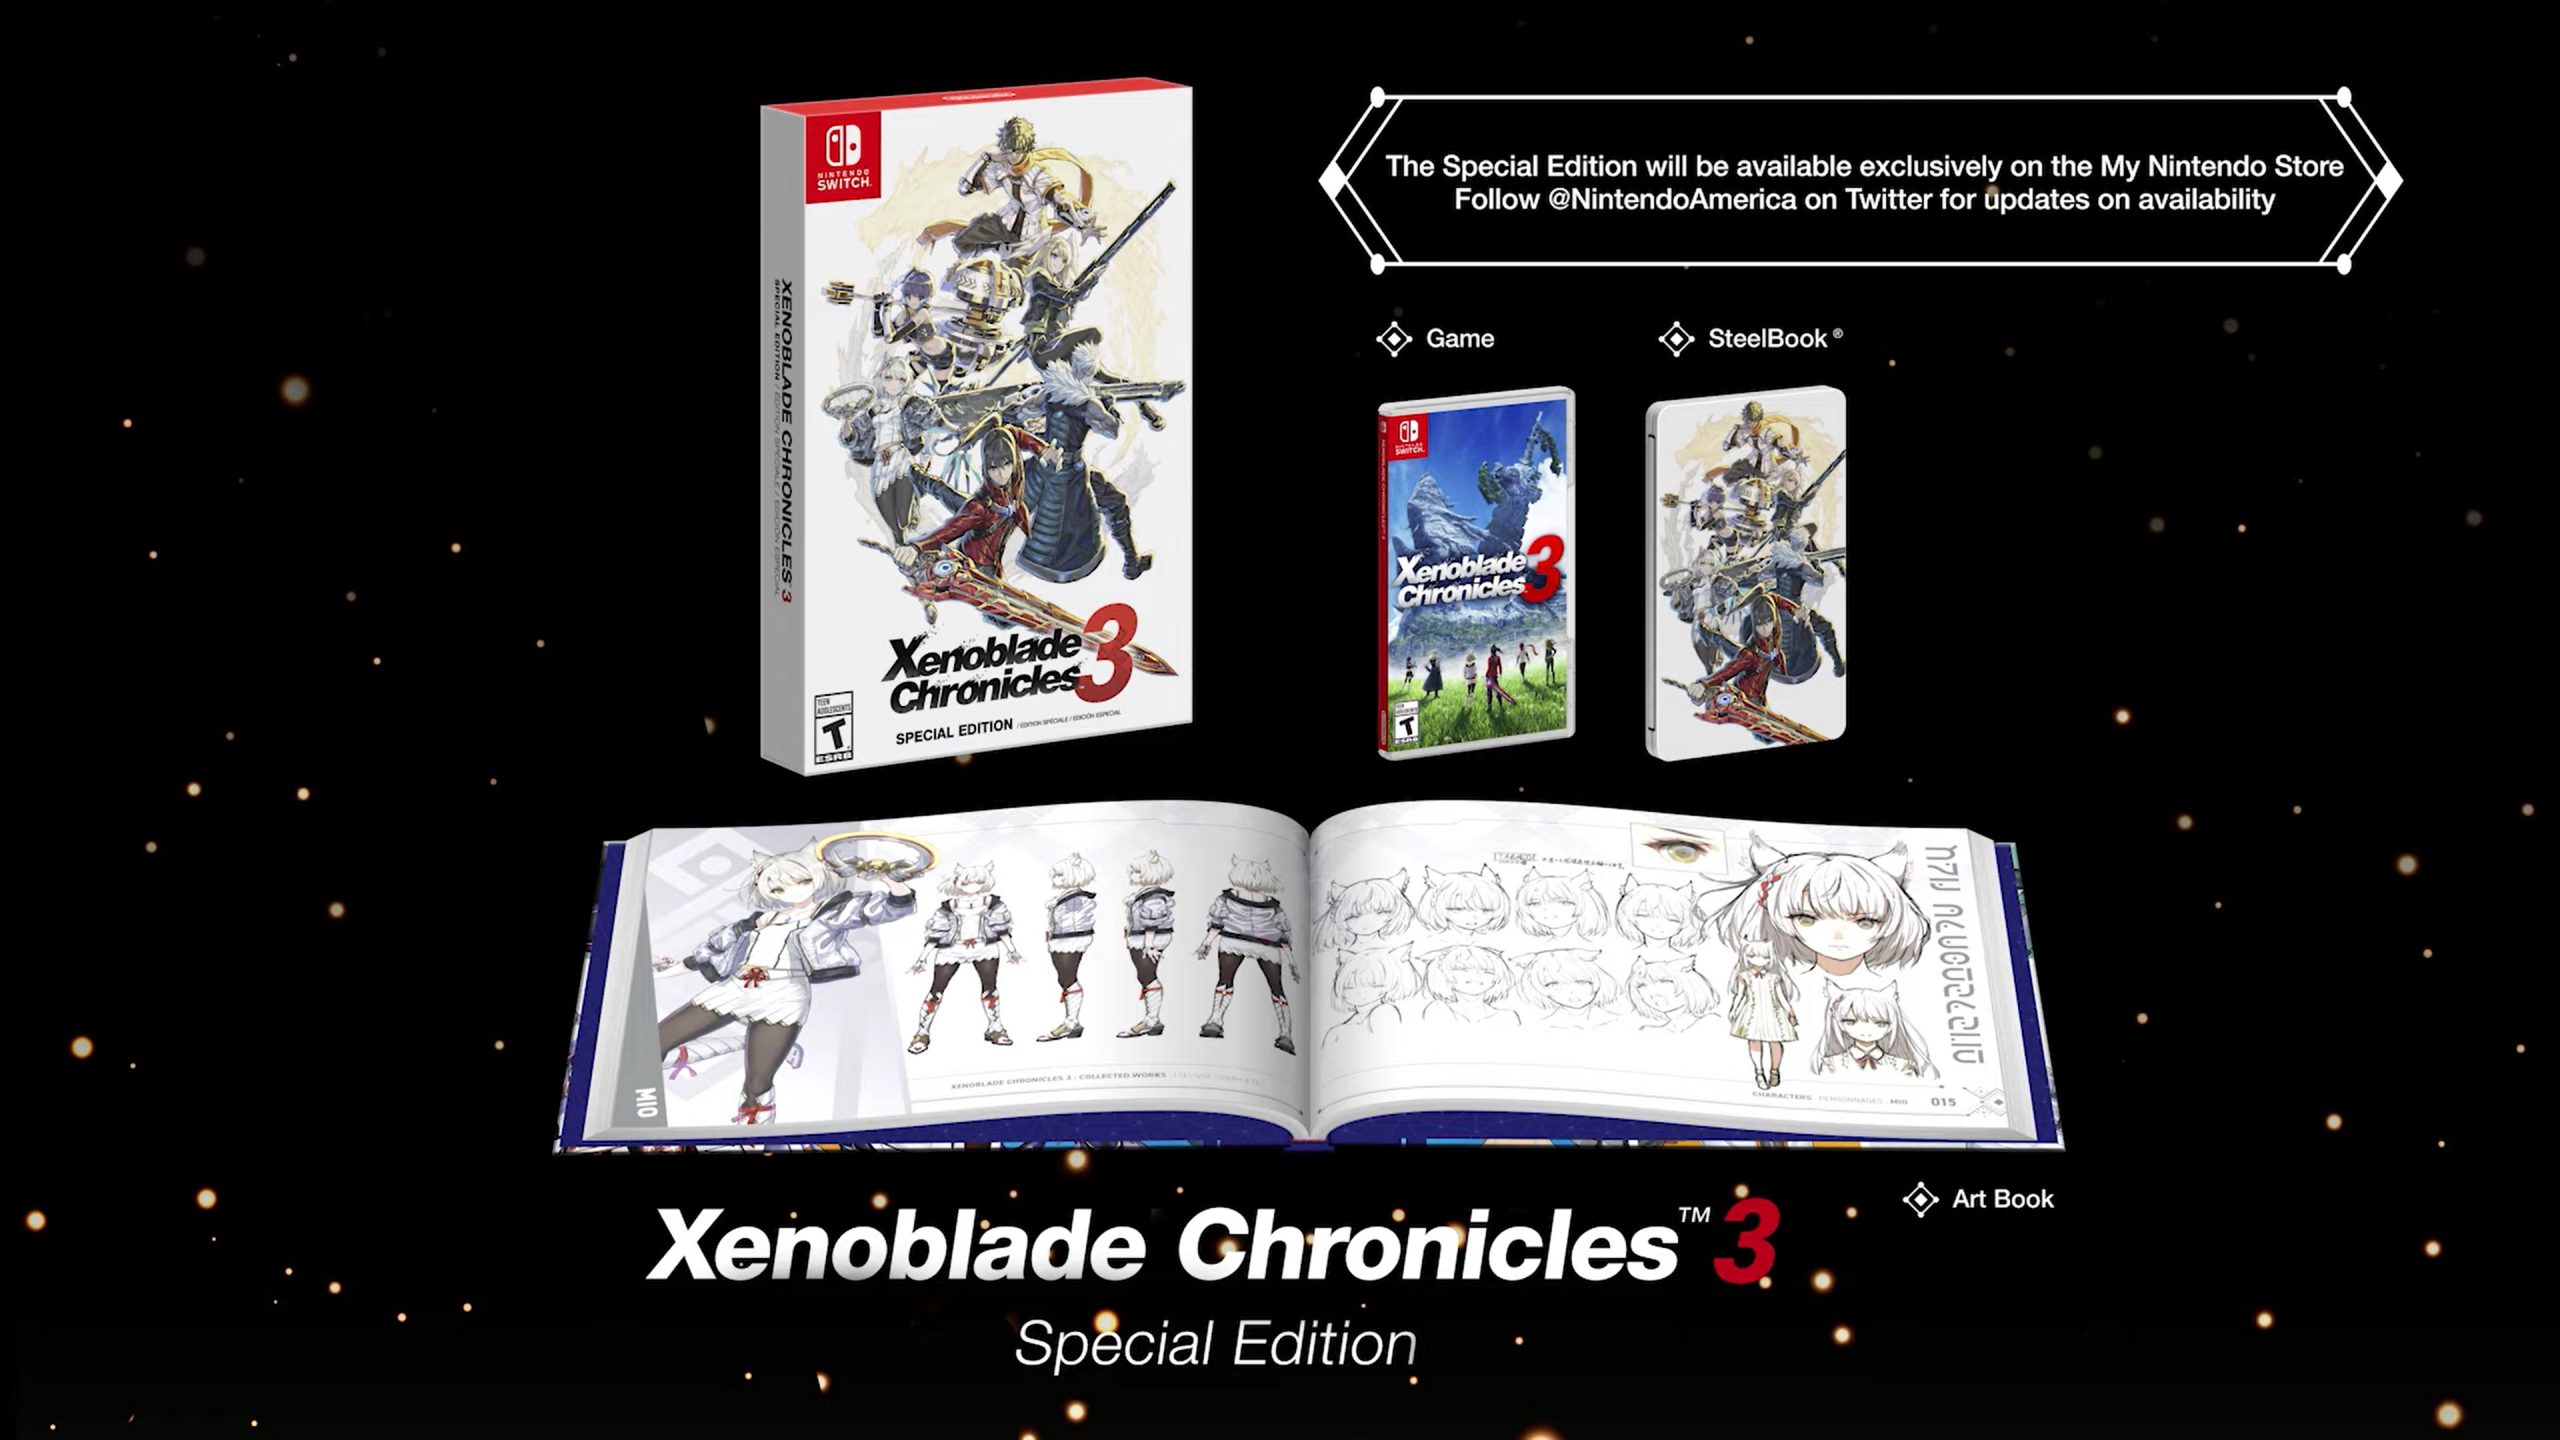 Xenoblade Chronicles 3 Direct reveals some new gameplay details